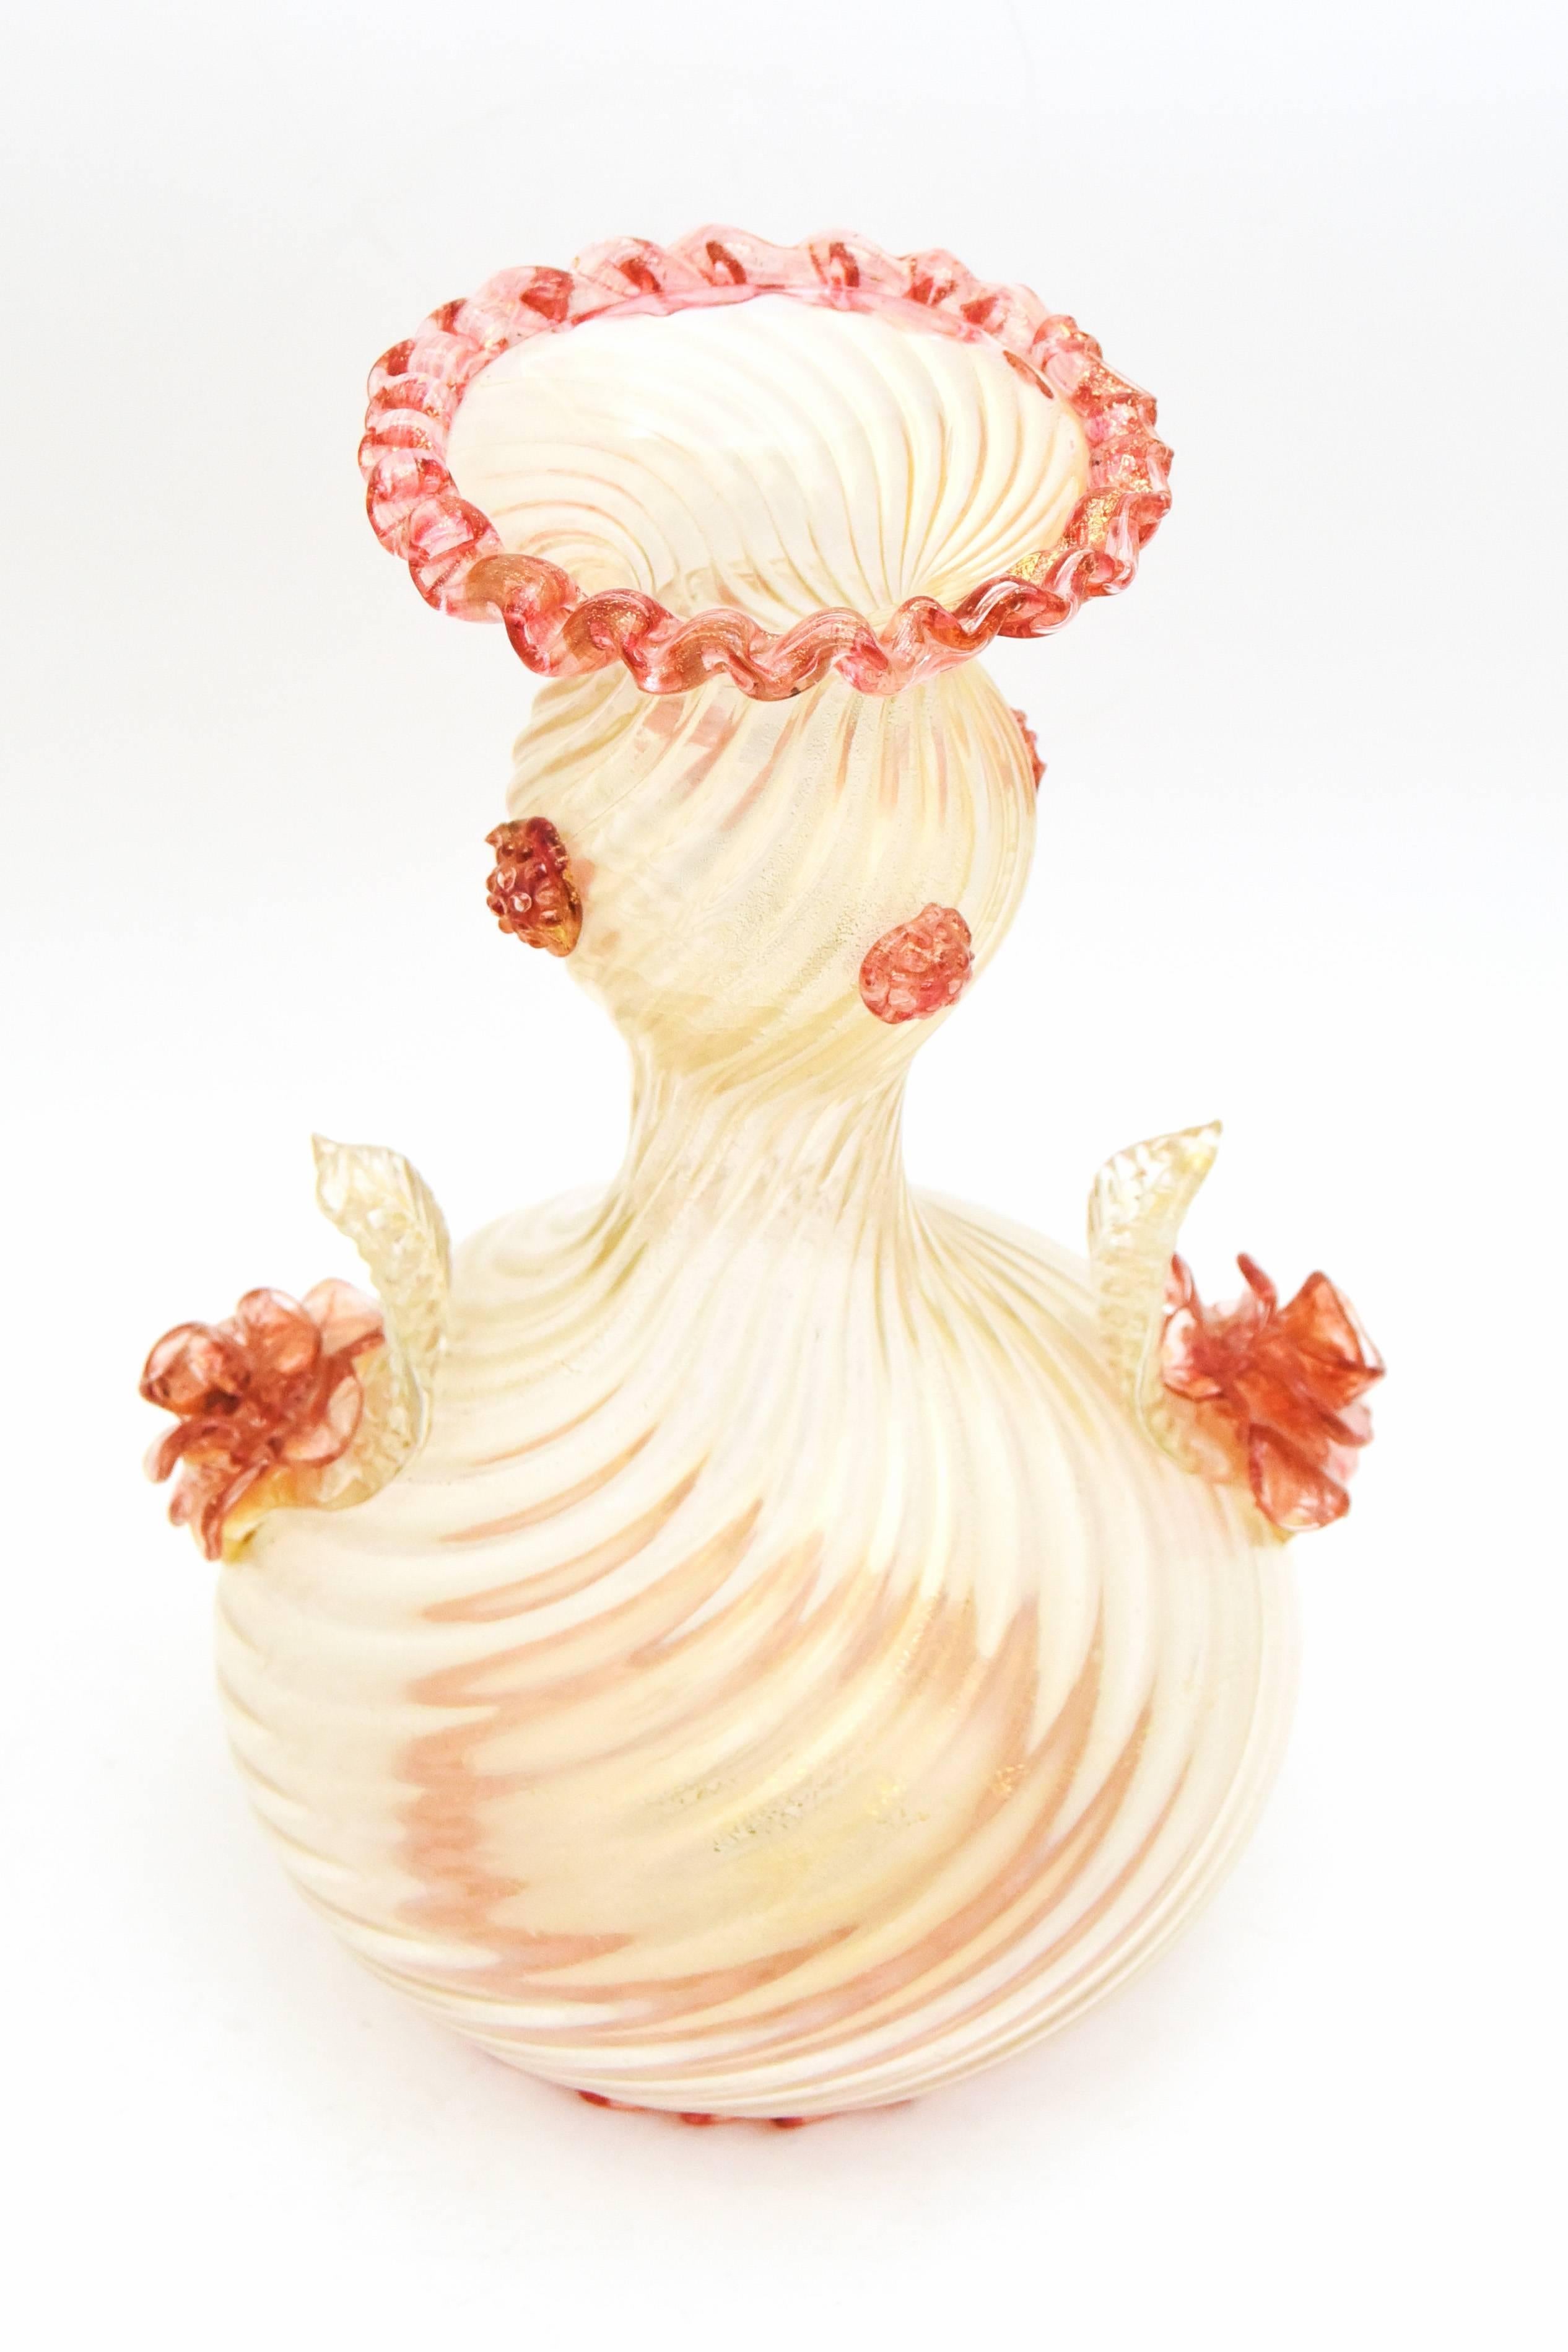 This is an unusual handblown Venetian Murano large vase with gold leaf infused ribbed glass. Made by Barovier e Toso, it is embellished with applied roses and matching rose-colored trim at the base and opening and applied prunts, to add to the